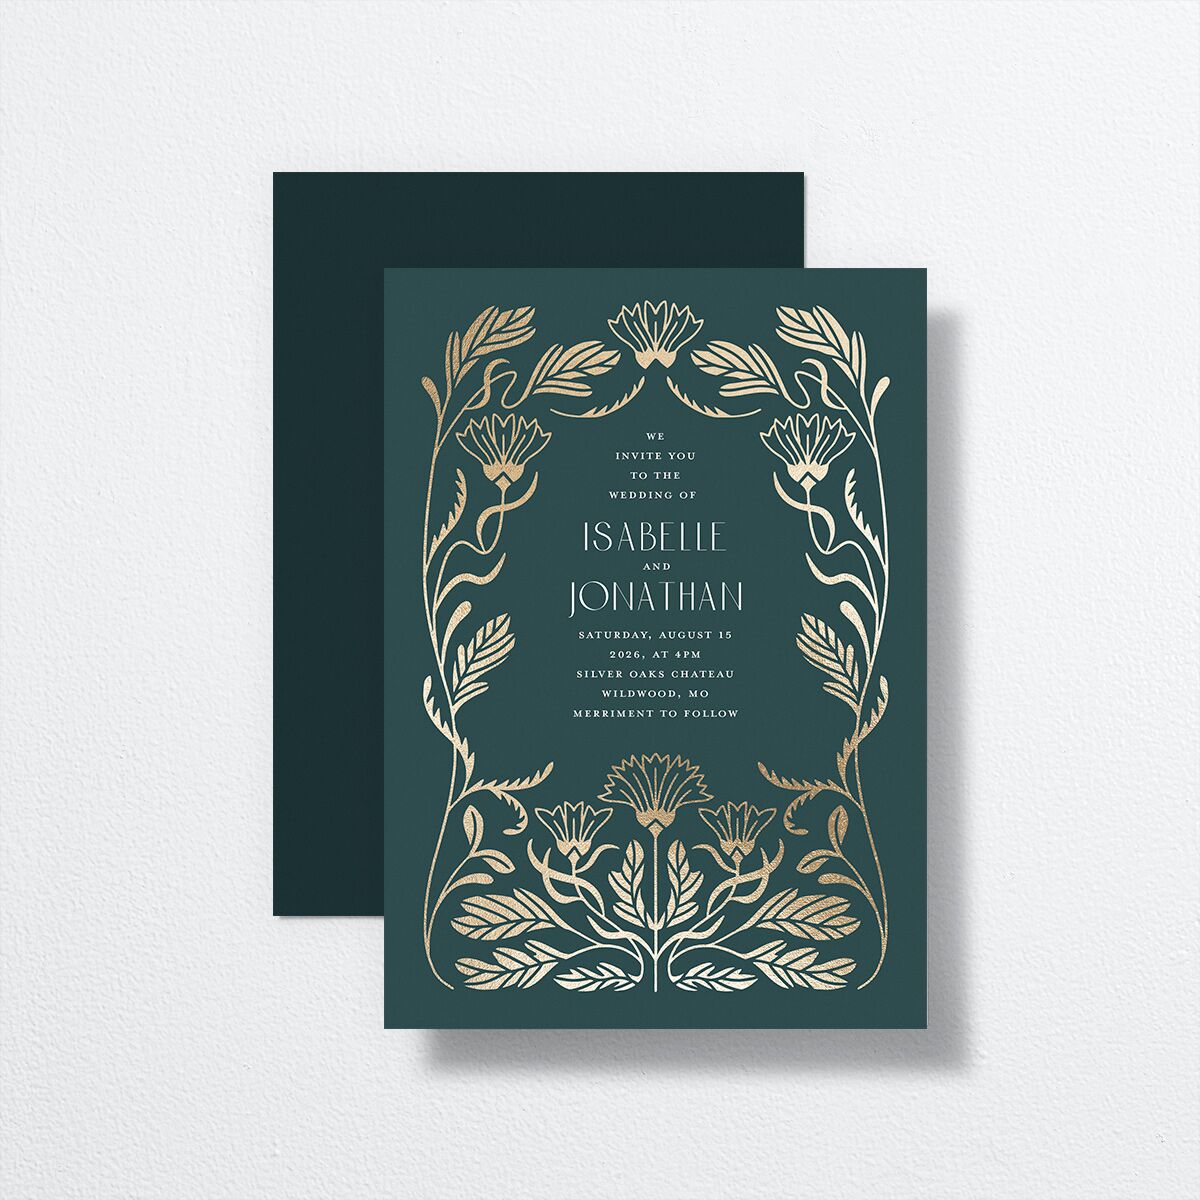 Elegant Nouveau Wedding Invitations front-and-back in teal